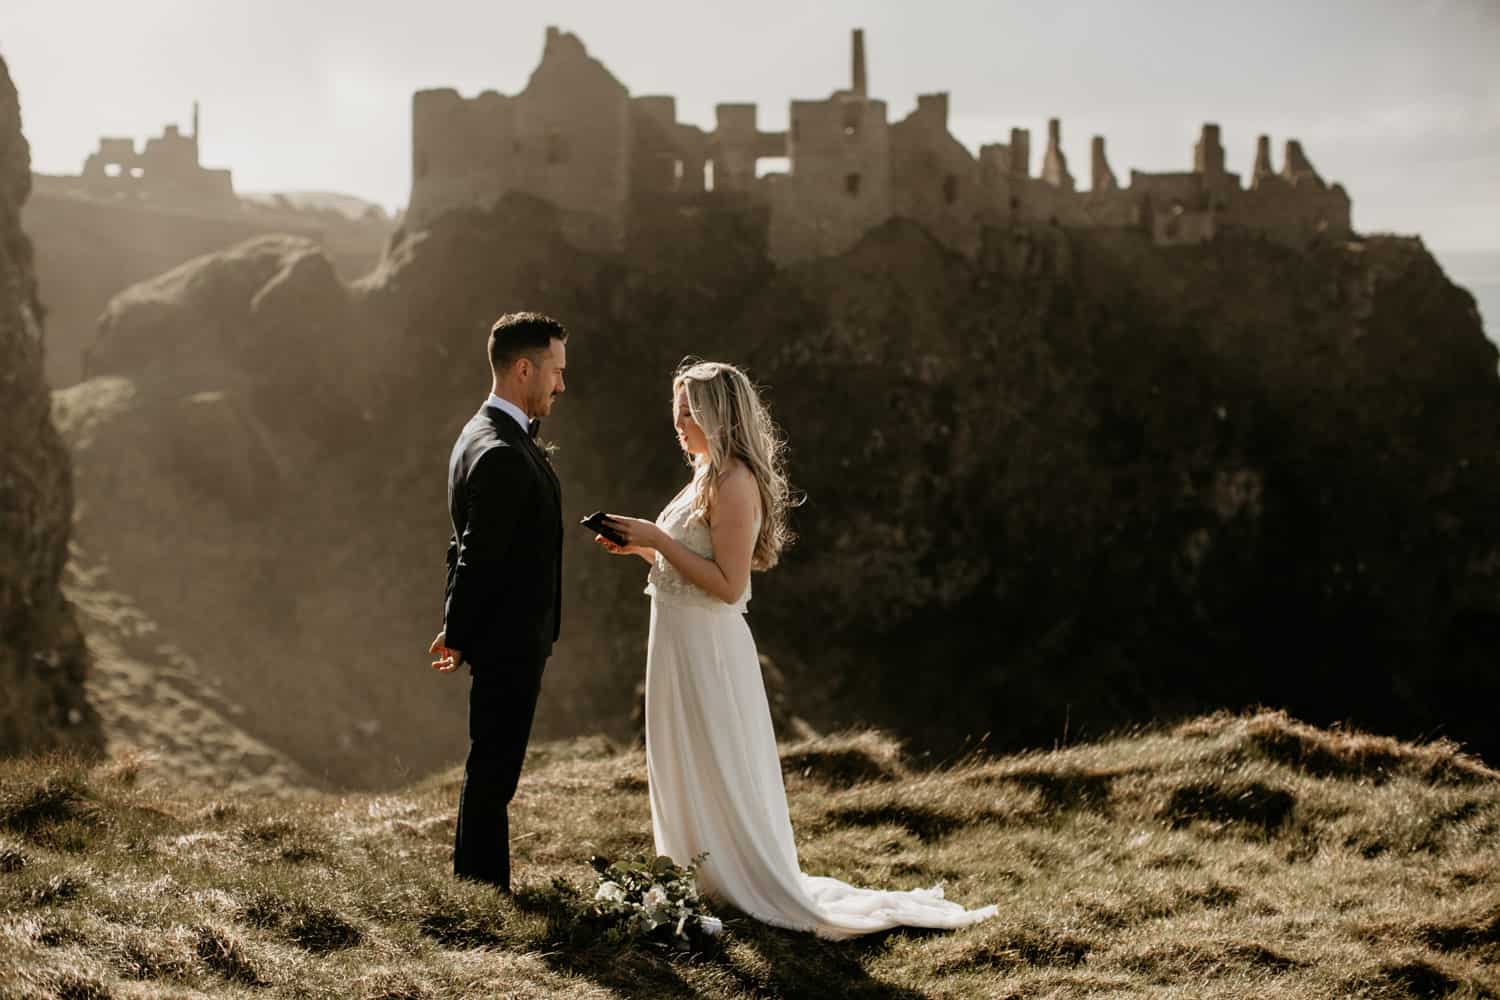 Top places to elope in Ireland 2020